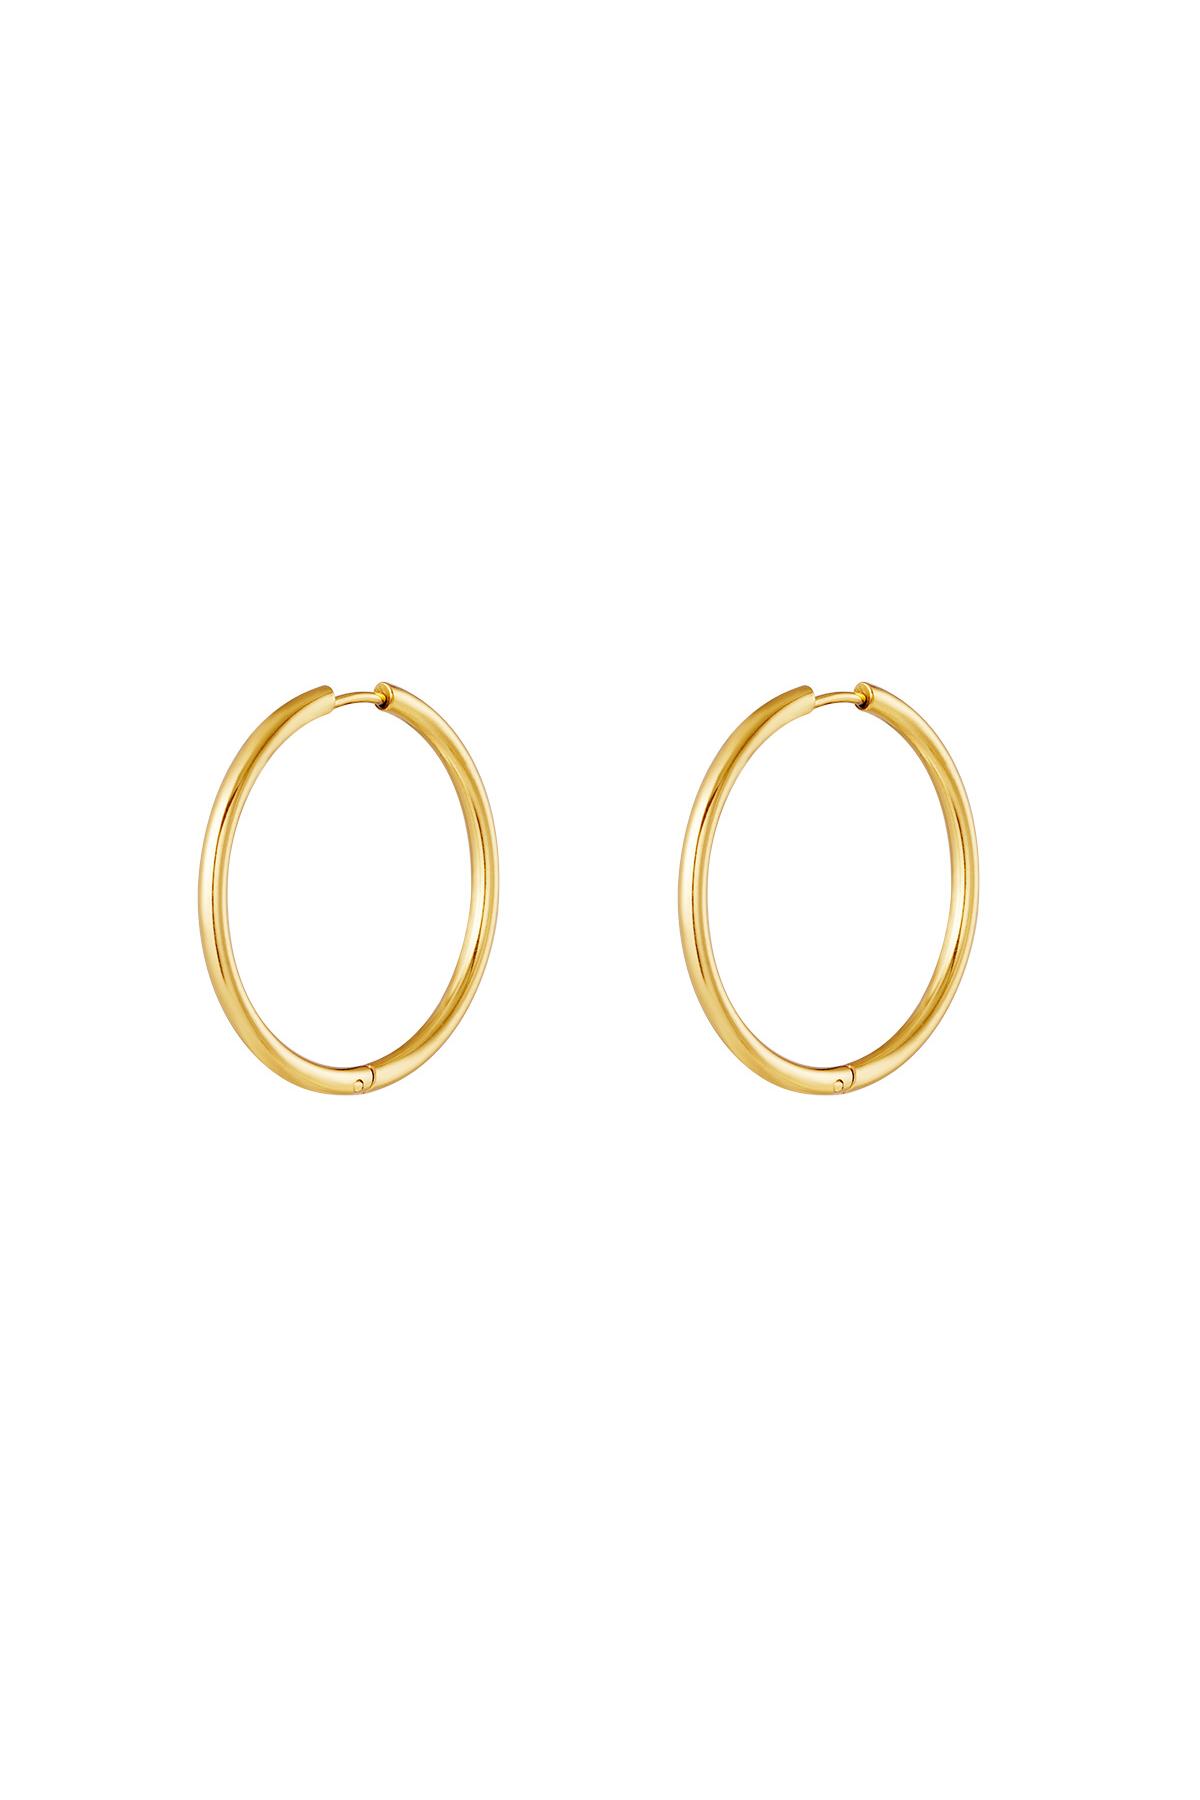 Stainless steel earrings hoops small Gold 